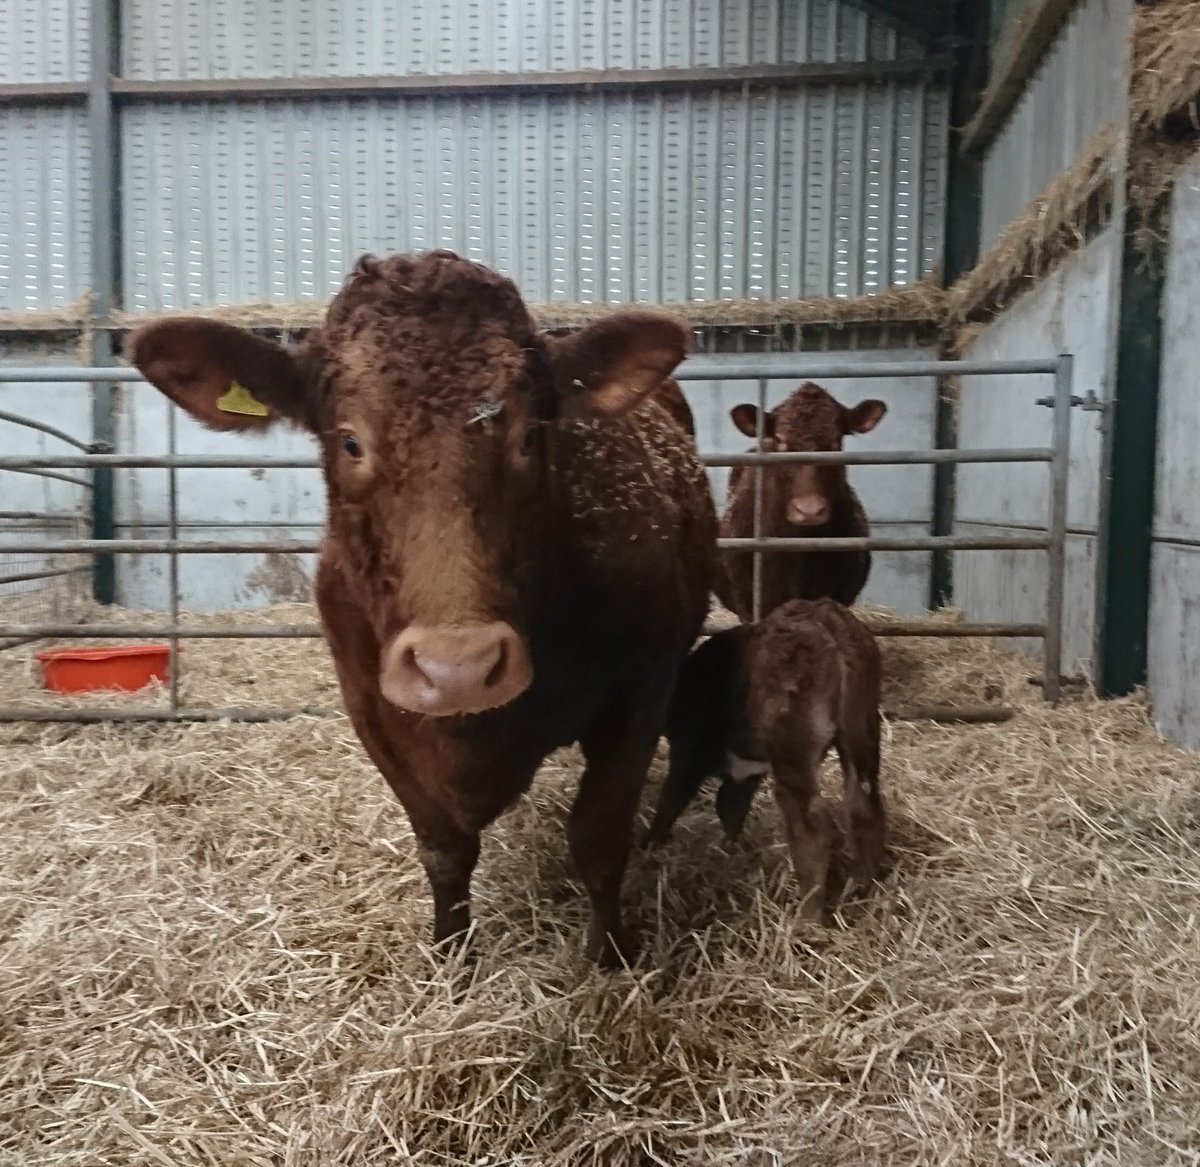 Here's a South Devon cow with her #calfatfoot in a well bedded pen. Both mum and calf doing very well. #teambeef #farm365 #ProudToFarm #colostrumisgold #cows